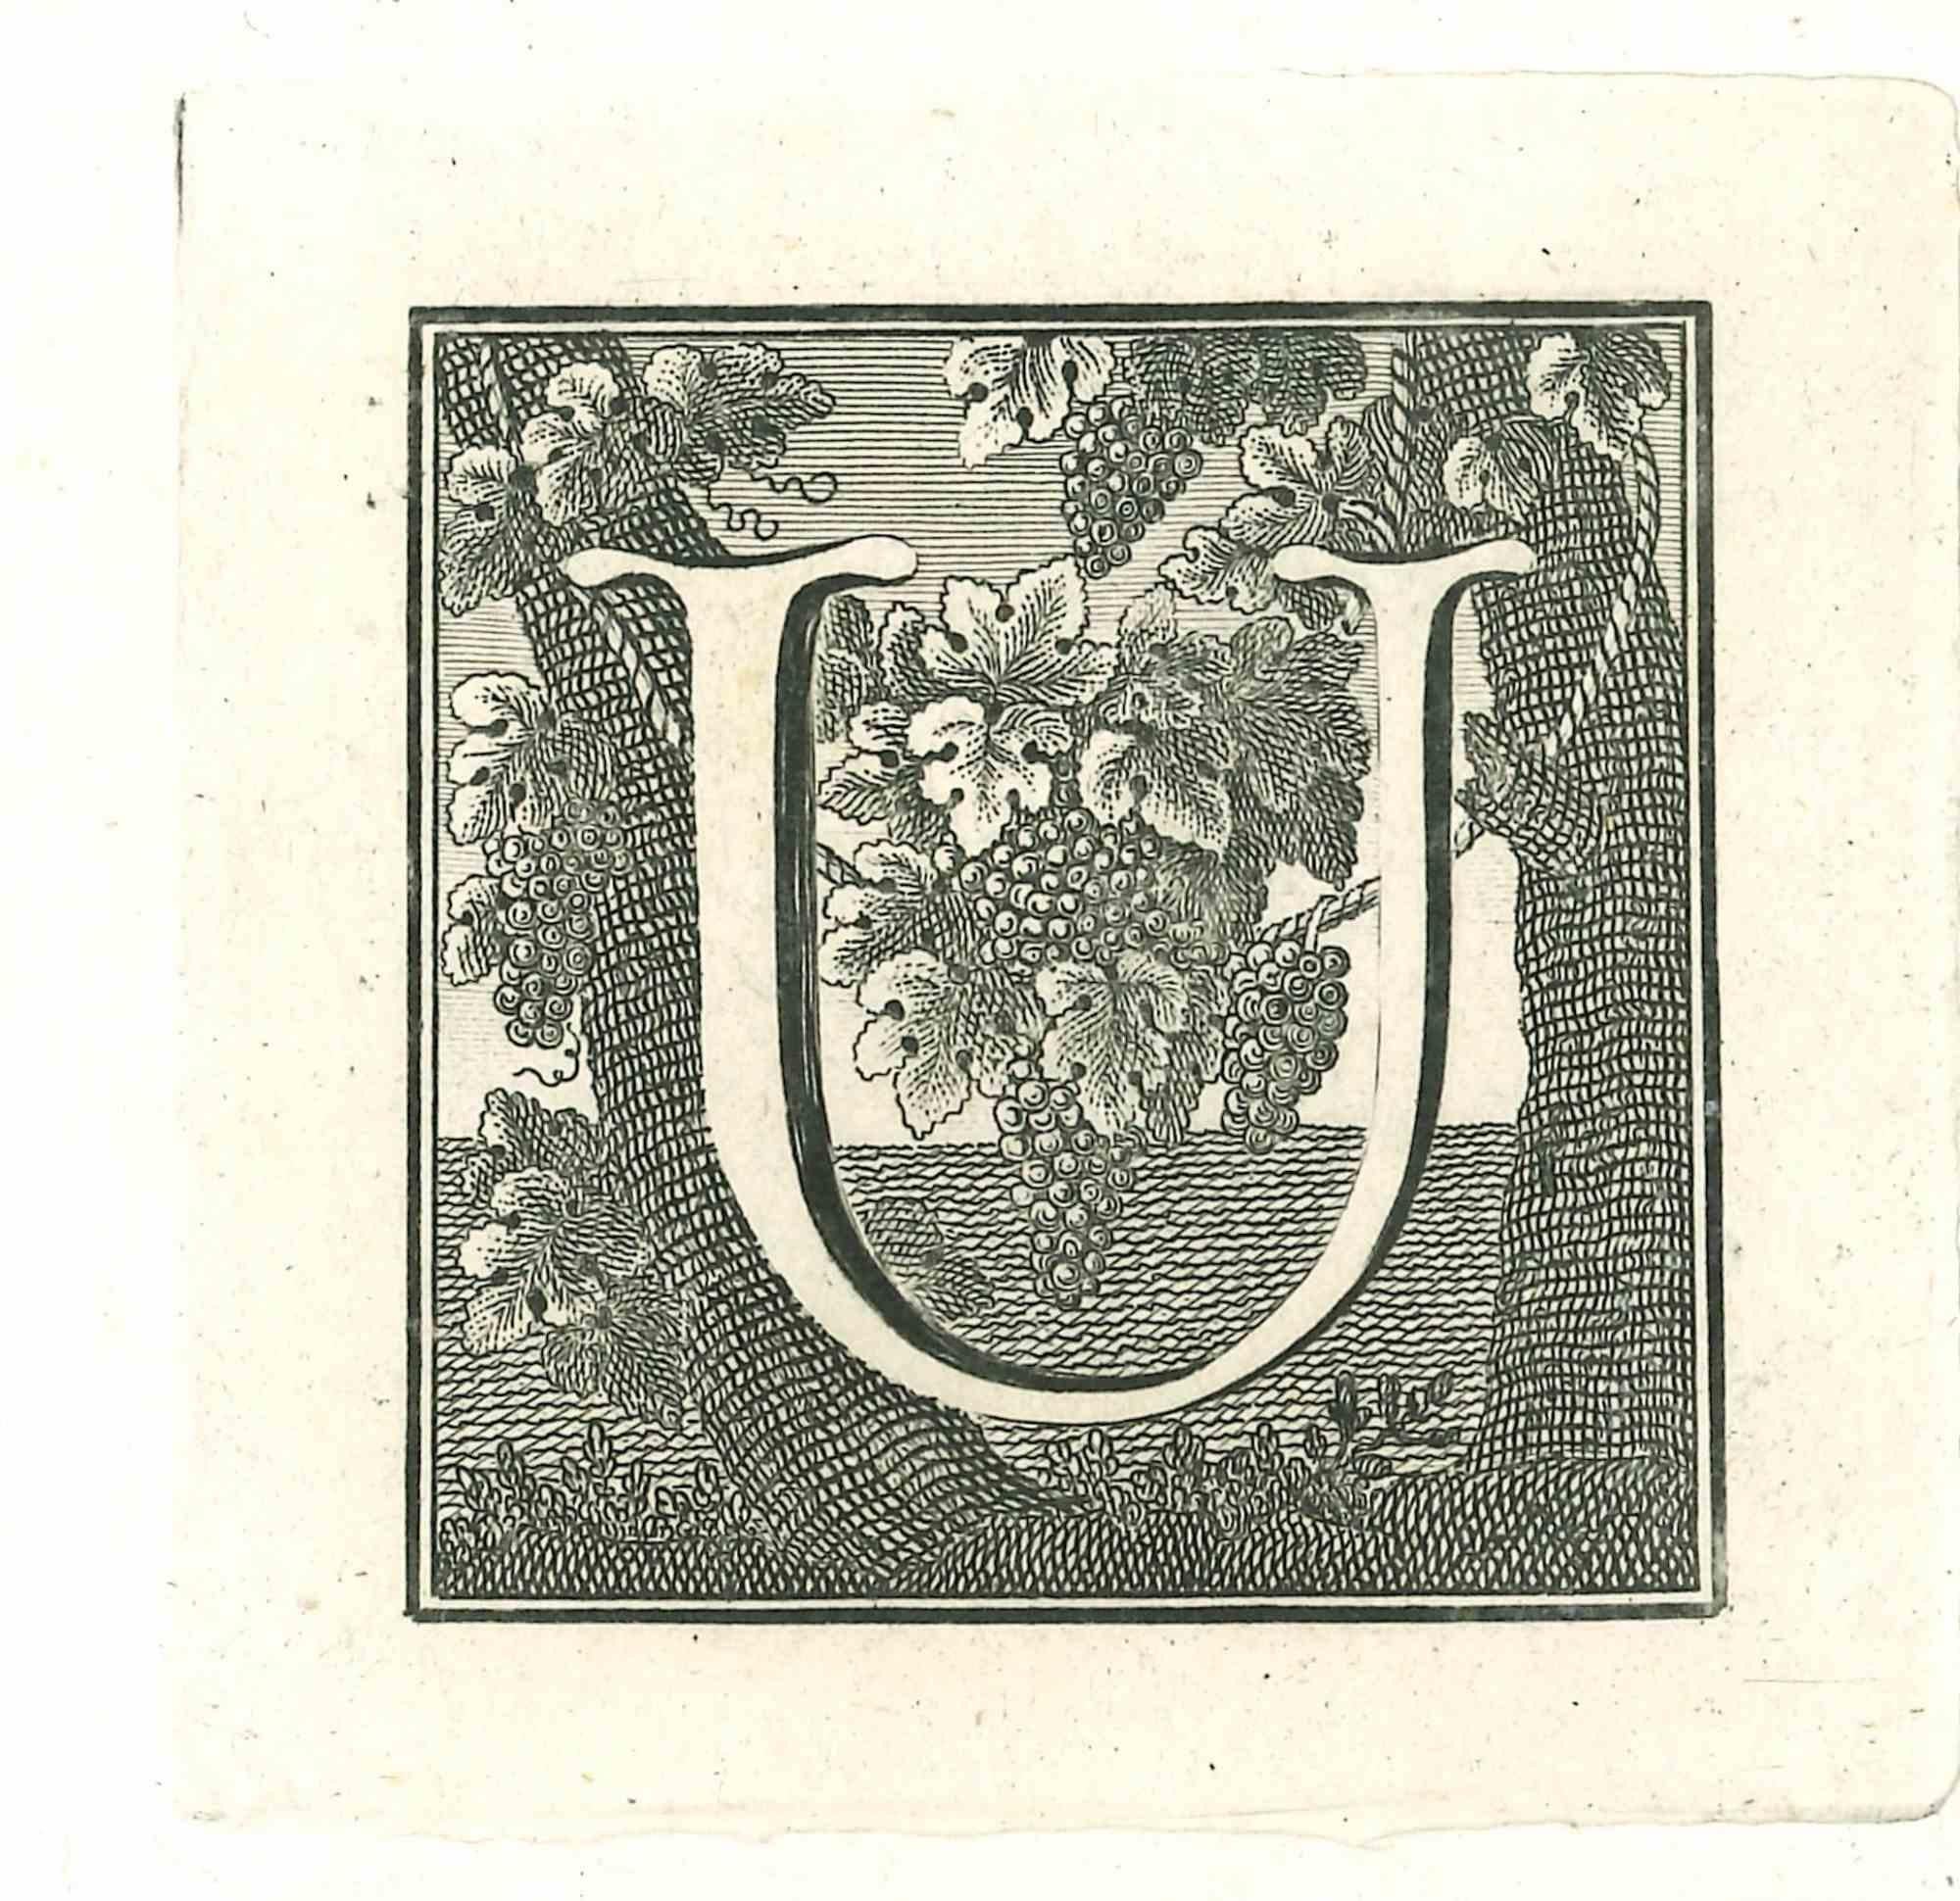 Unknown Figurative Print - Capital letter U from Antiquities of Herculaneum Exposed-Etching-18th Century